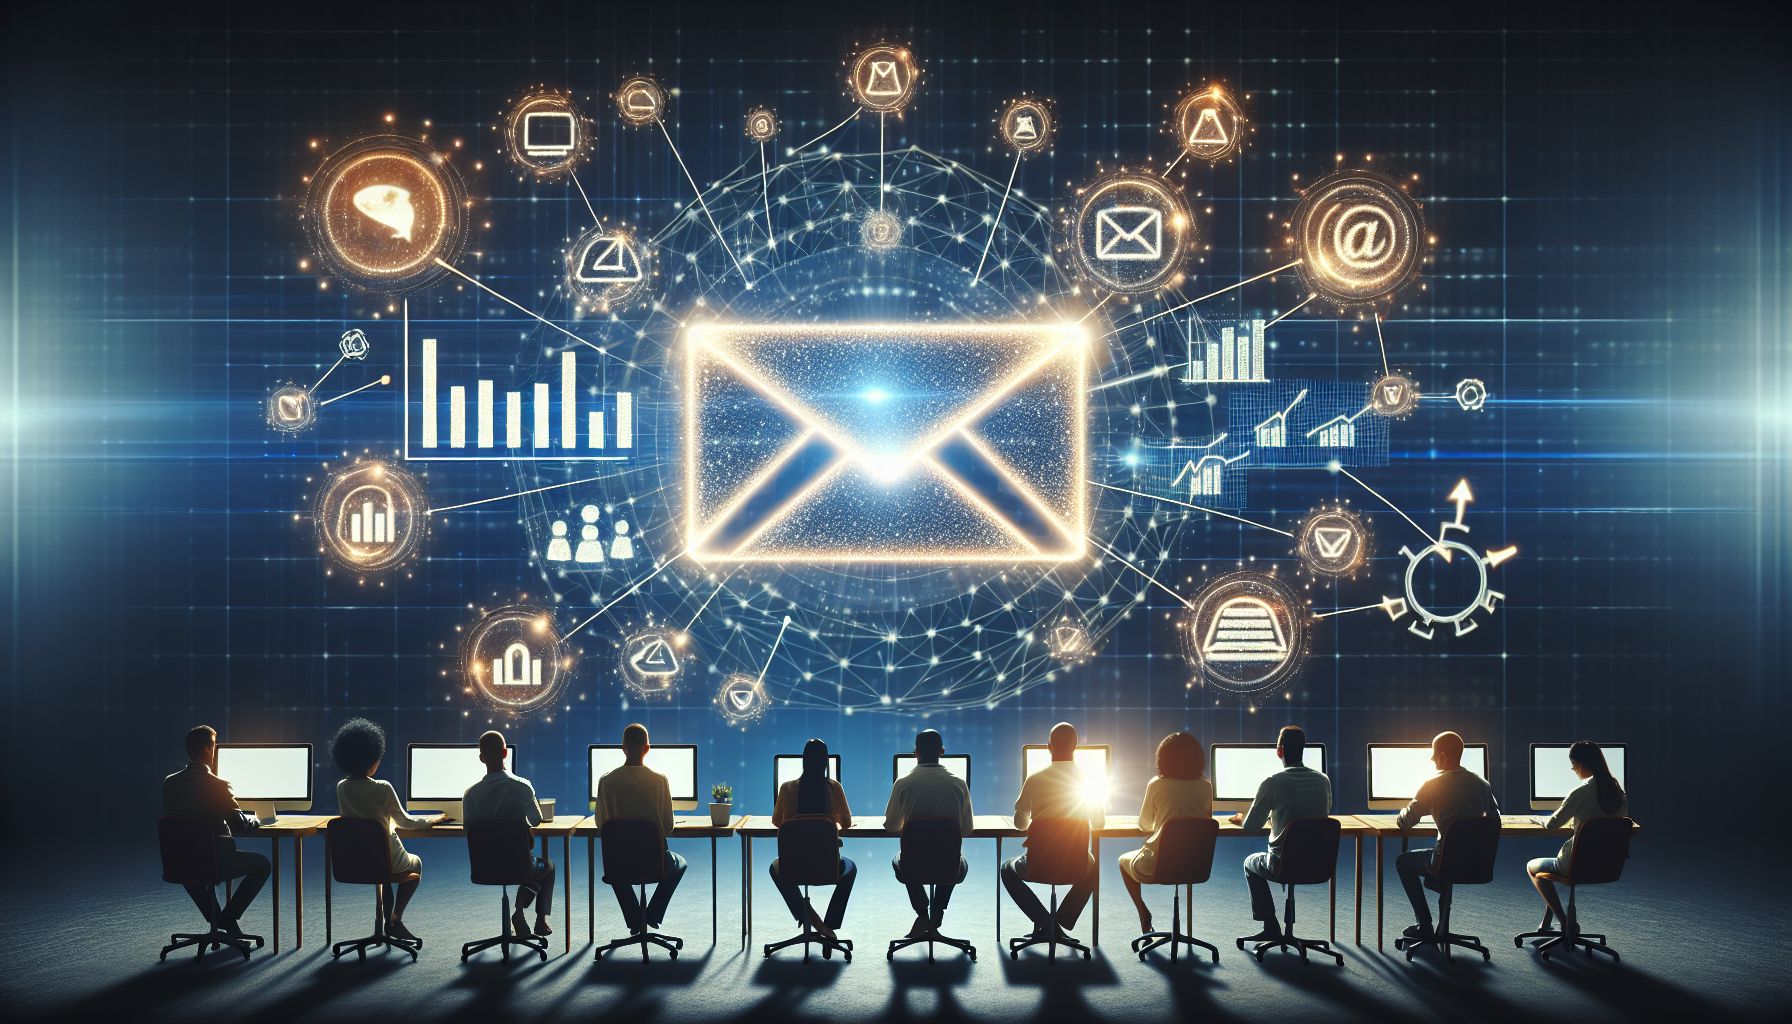 **Topic: The Importance of Email Marketing in the Digital Age**